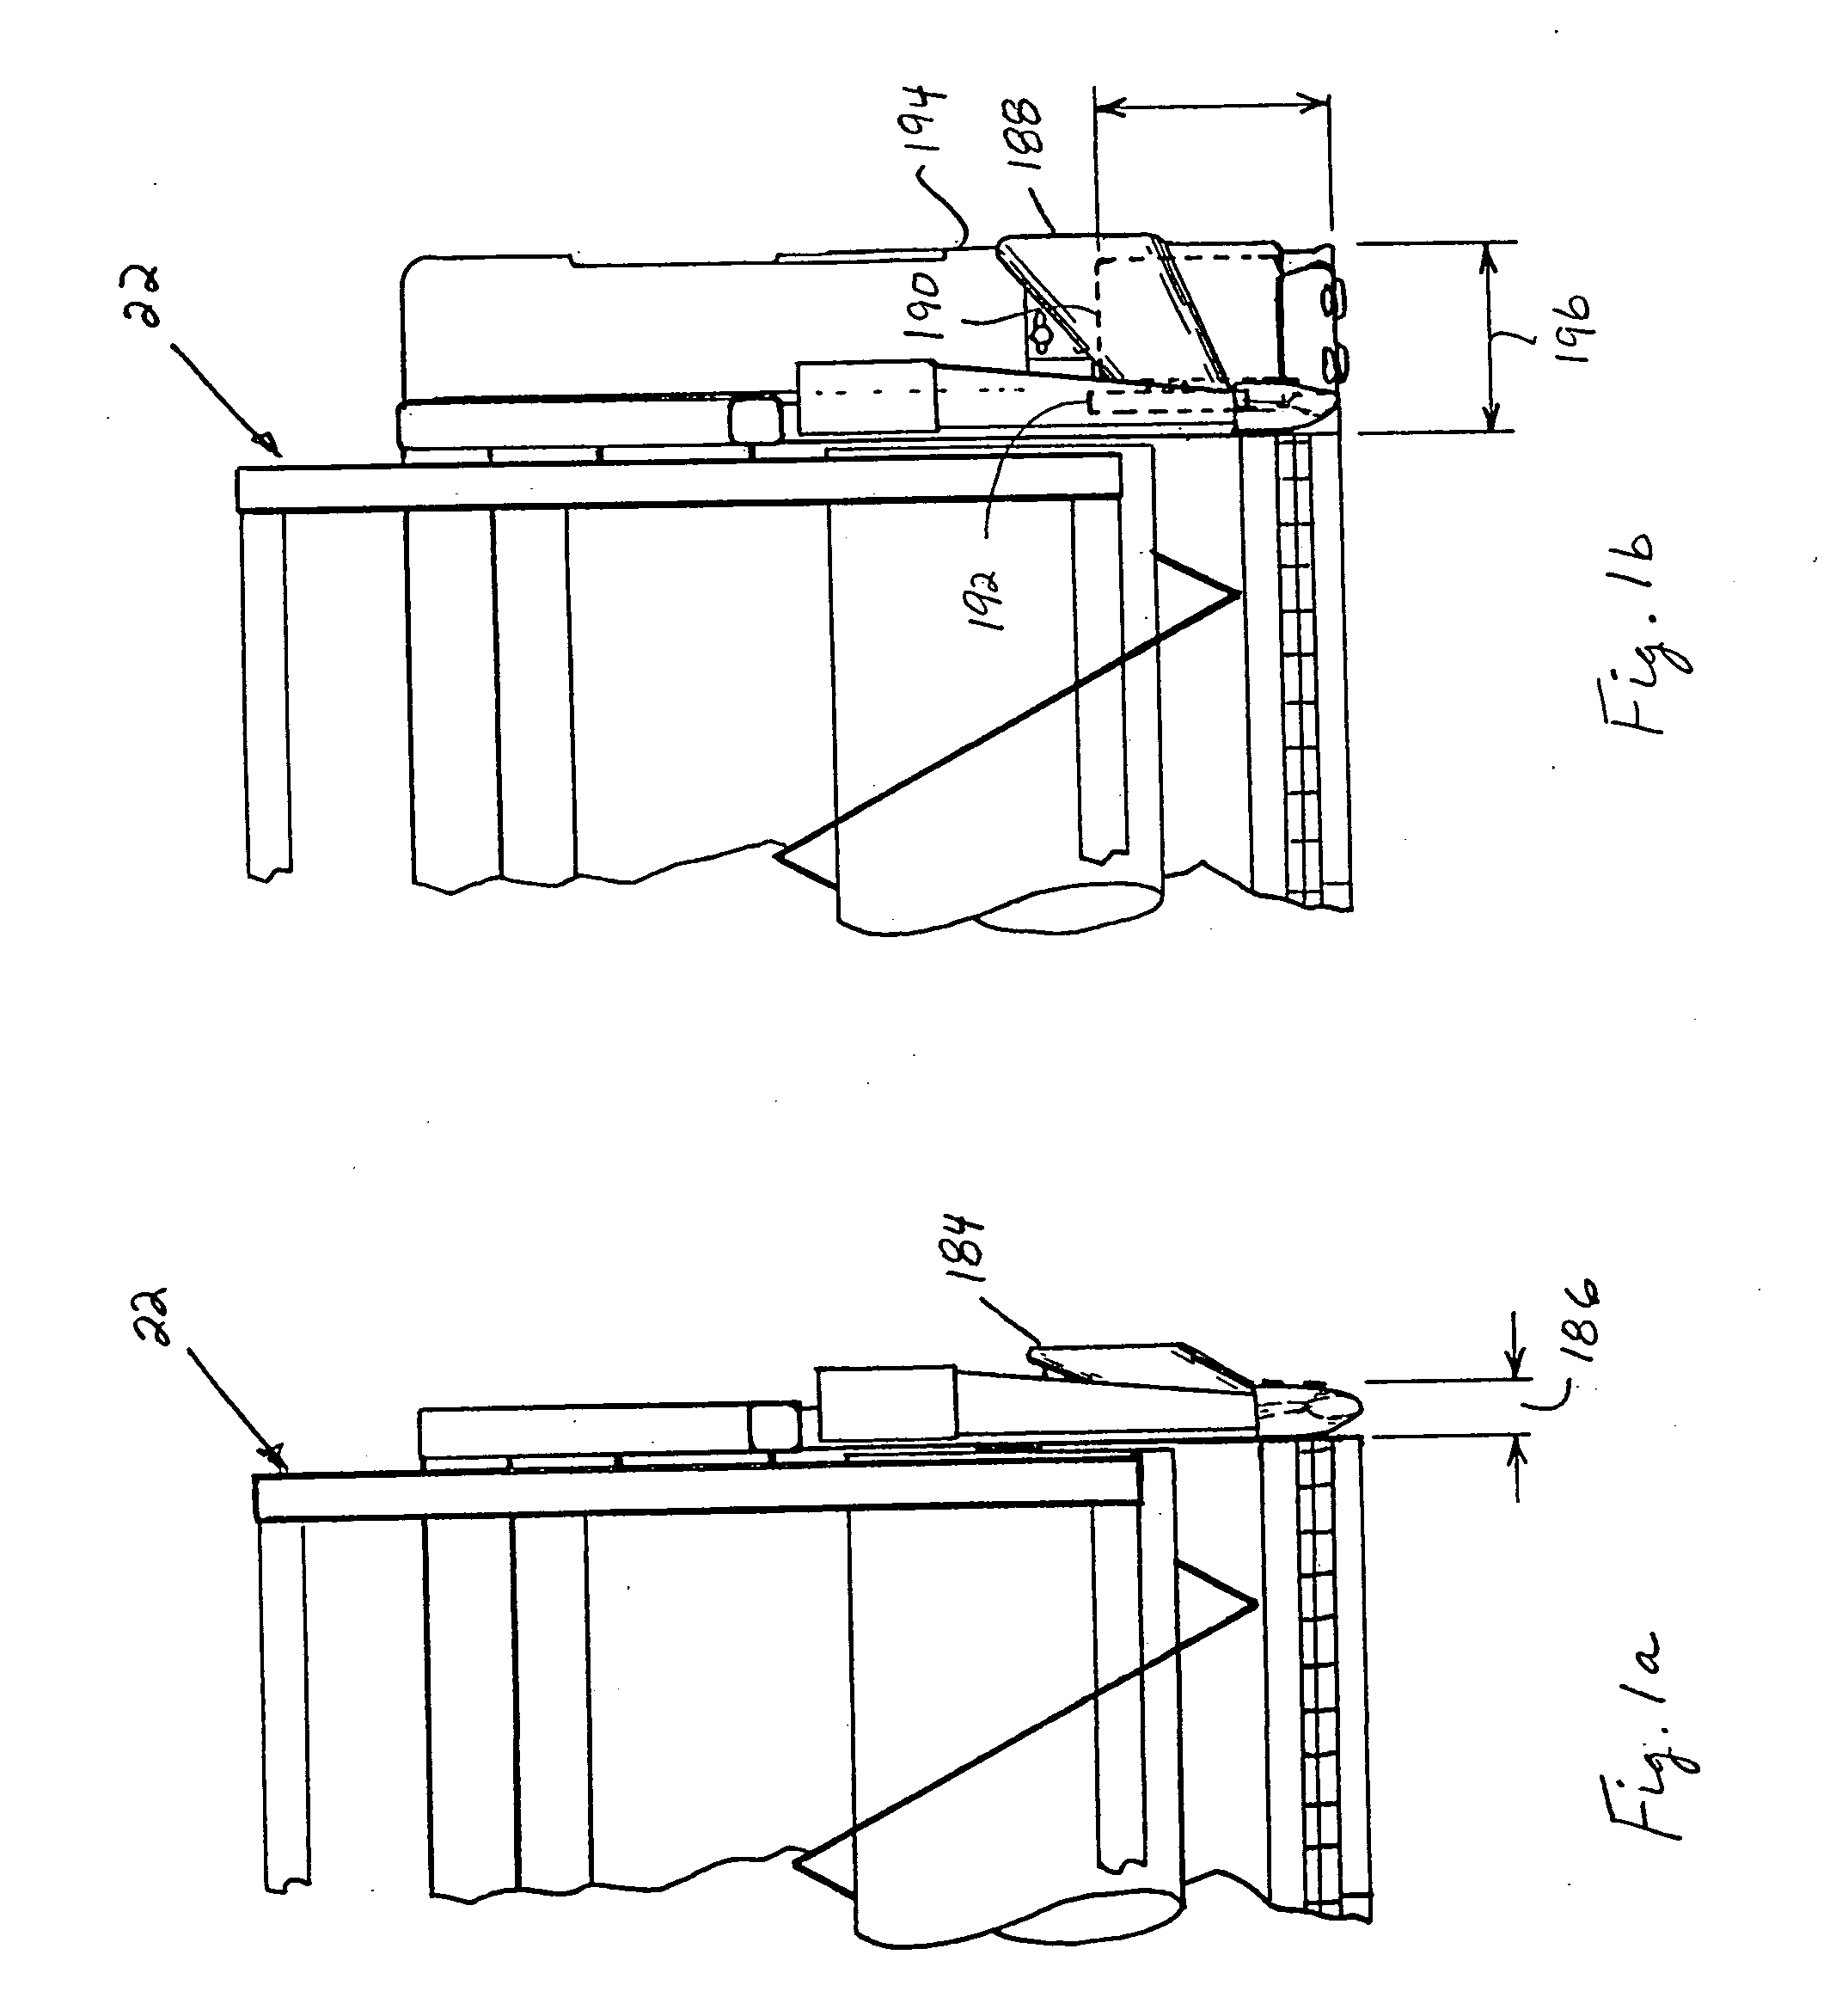 Compact sickle drive for a header of an agricultural plant cutting machine